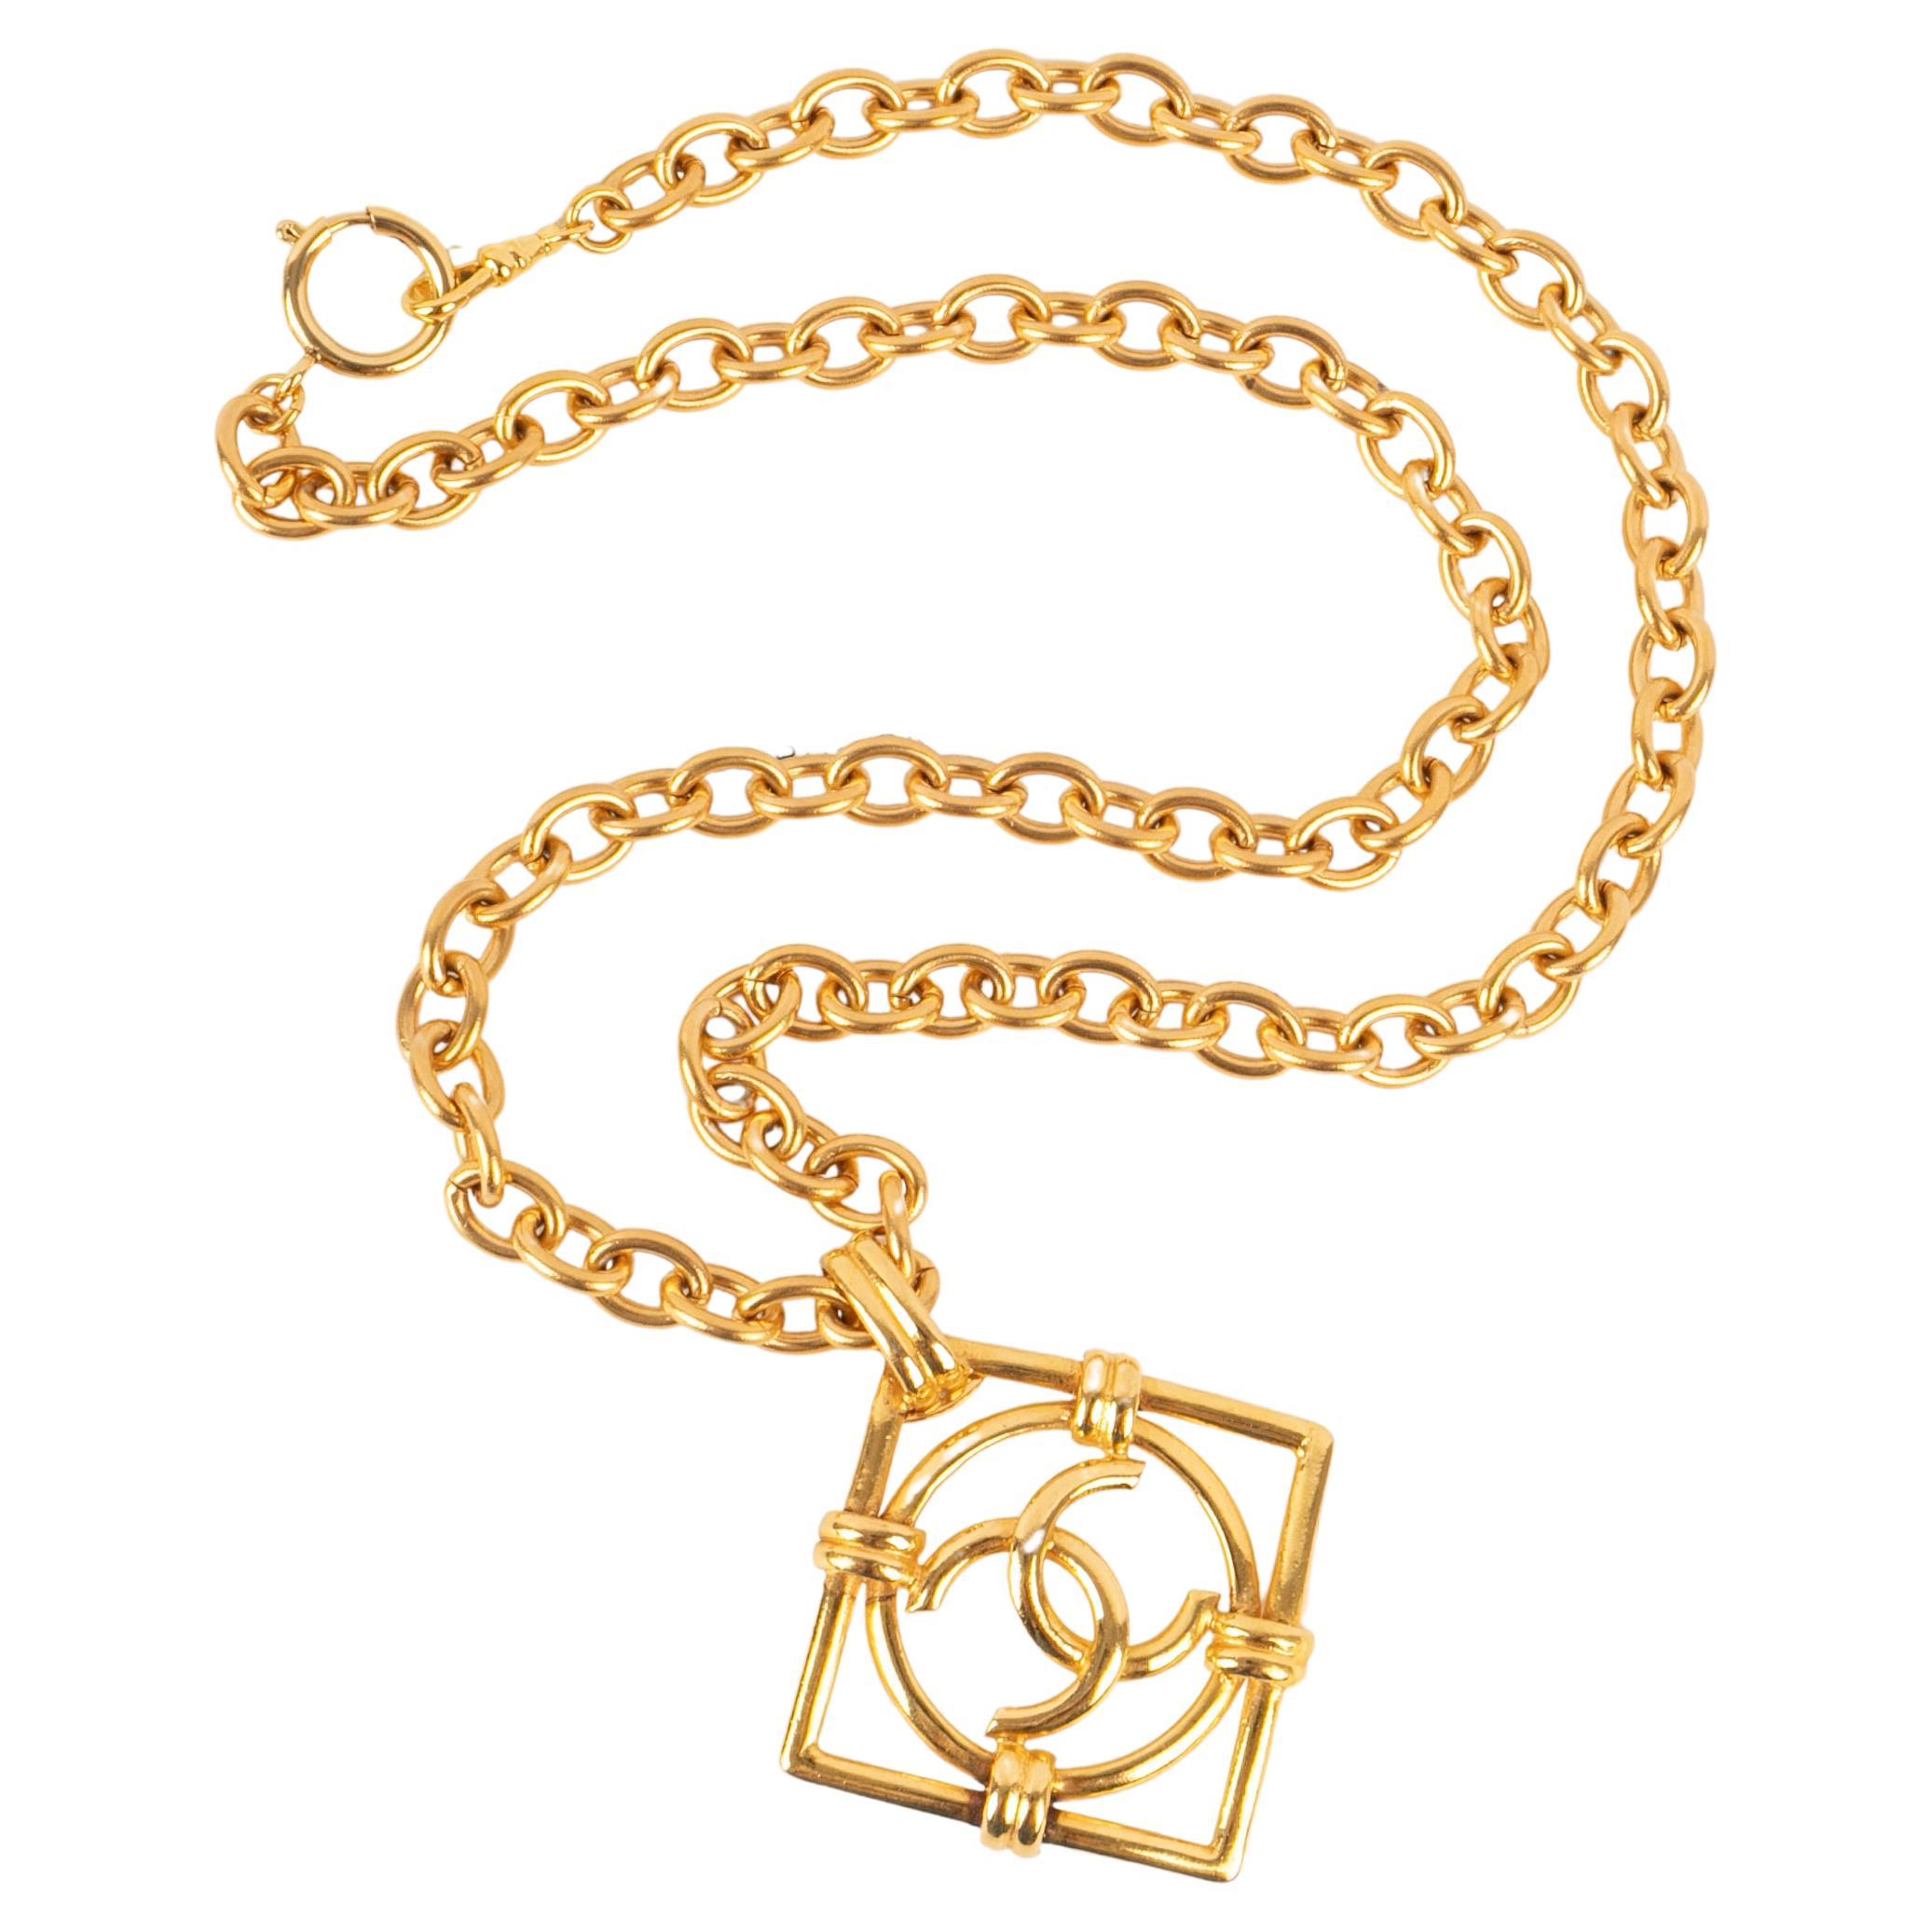 Chanel necklace 1990s